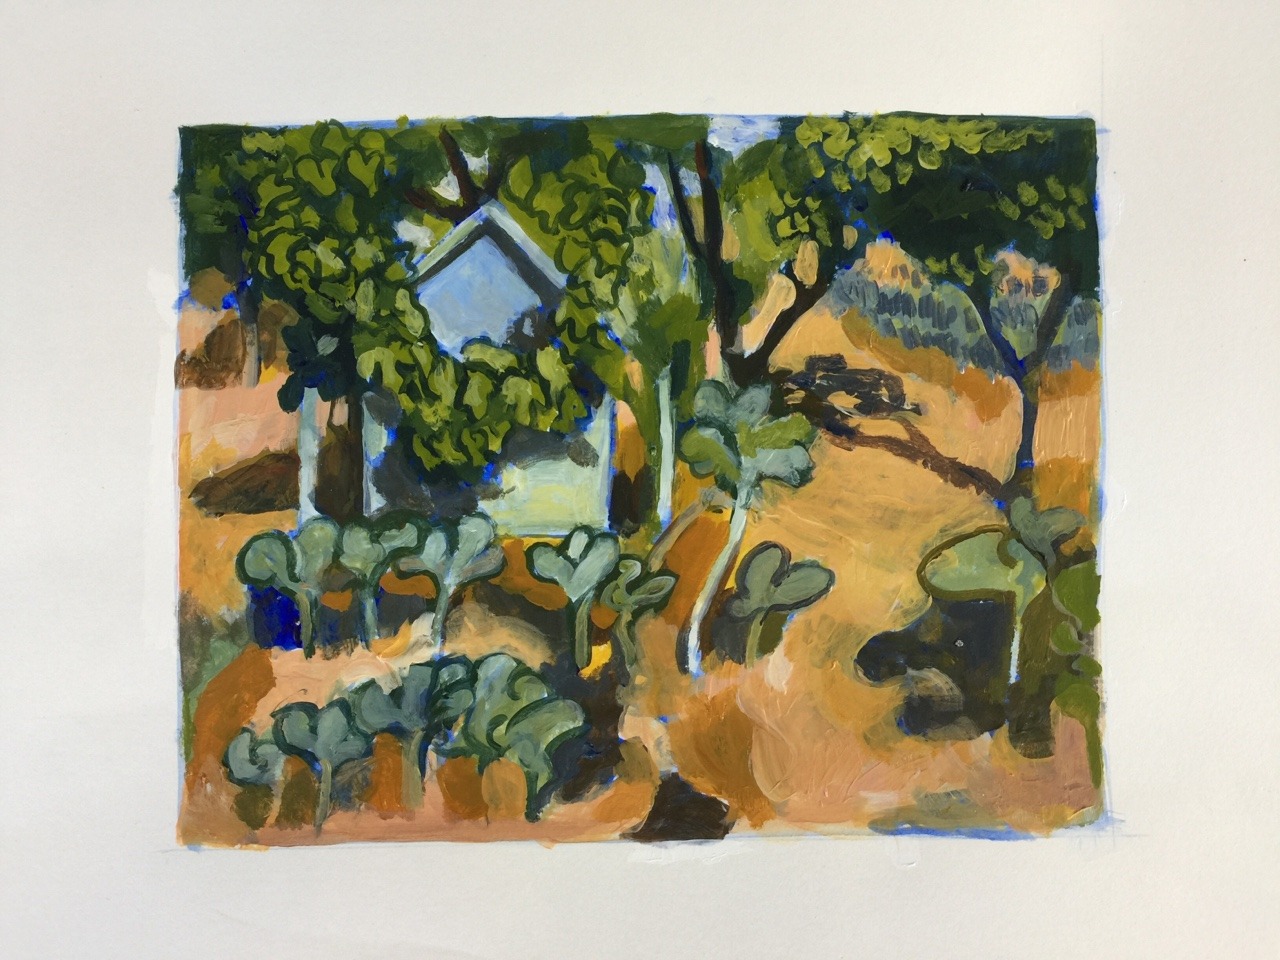 Photo of a sketchbook page with a painted scene of a lush garden and a shed